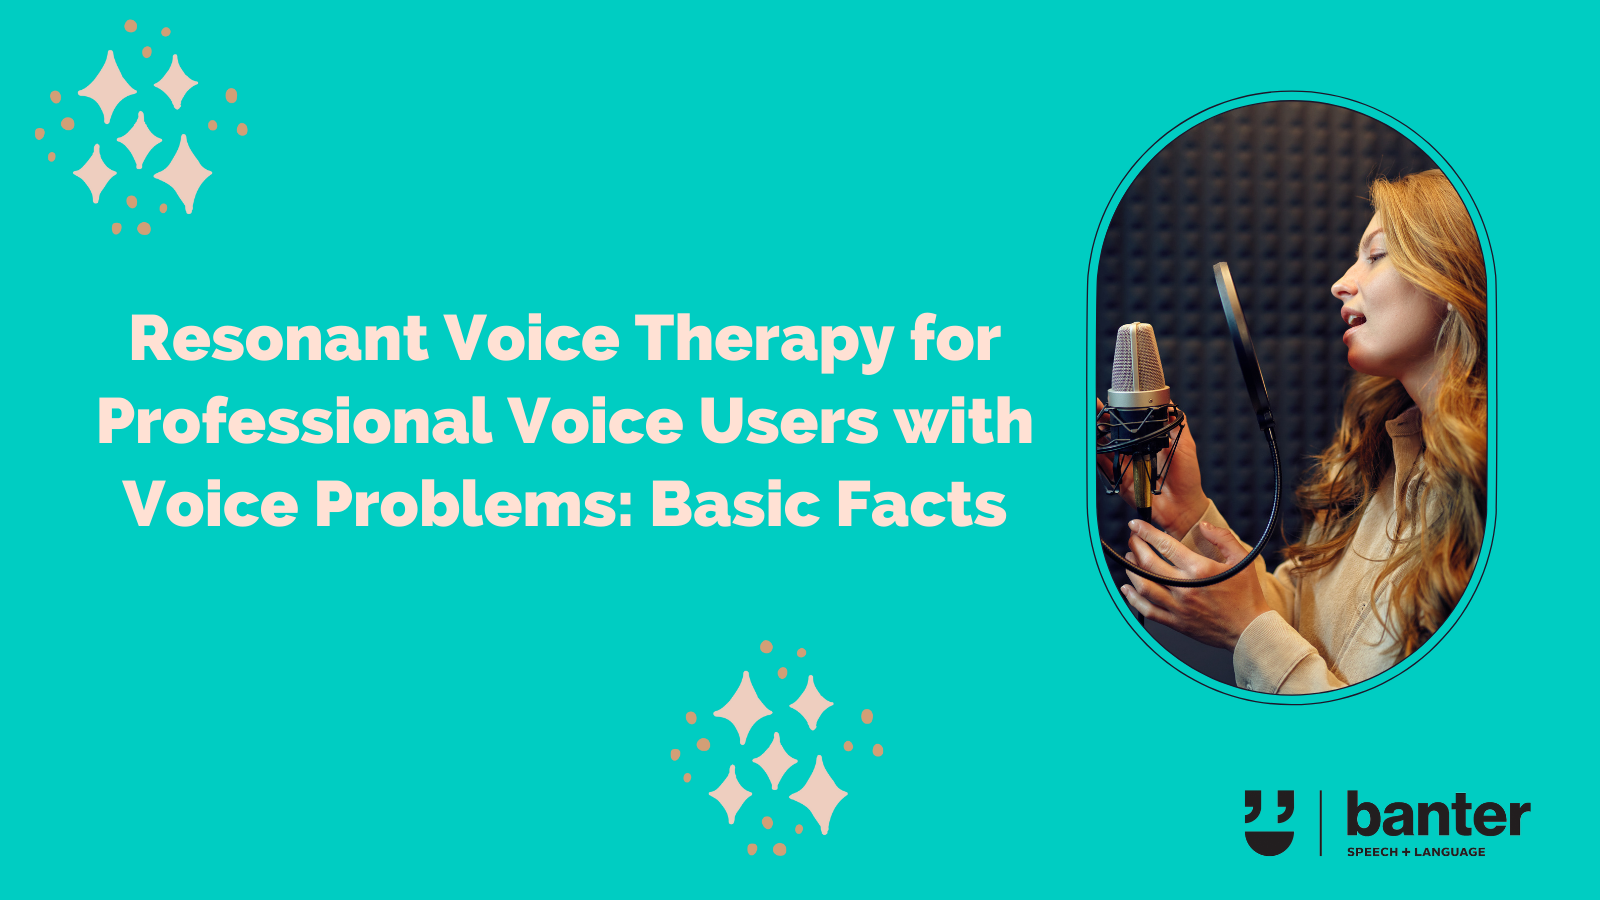 Resonant voice therapy for professional voice users with voice problems basic facts